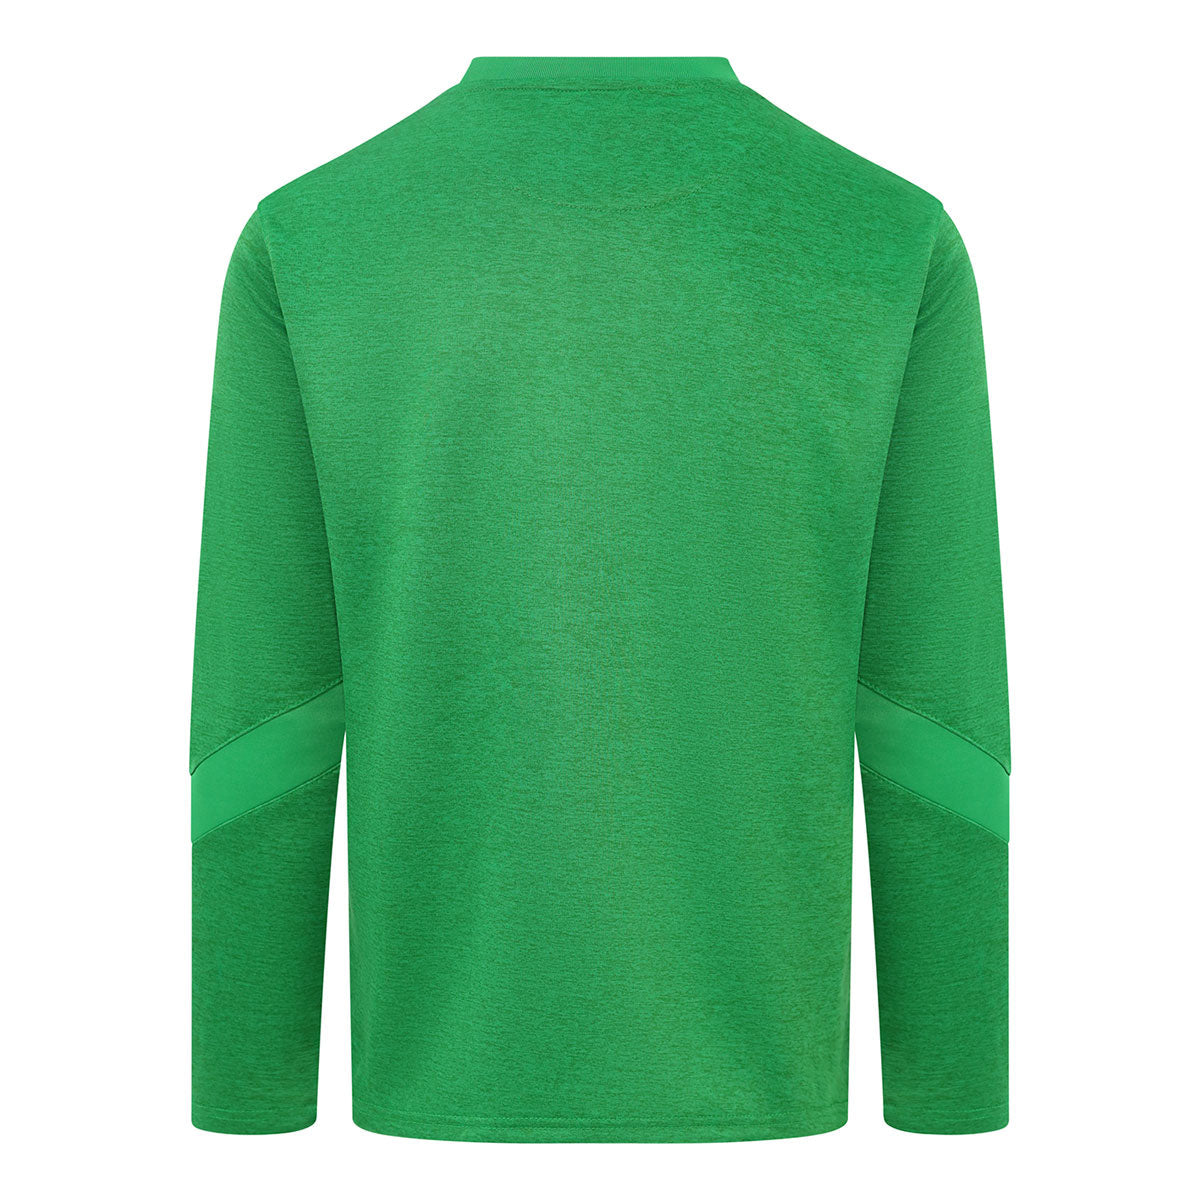 Mc Keever CLG Ghaoth Dobhair Core 22 Sweat Top - Adult - Green